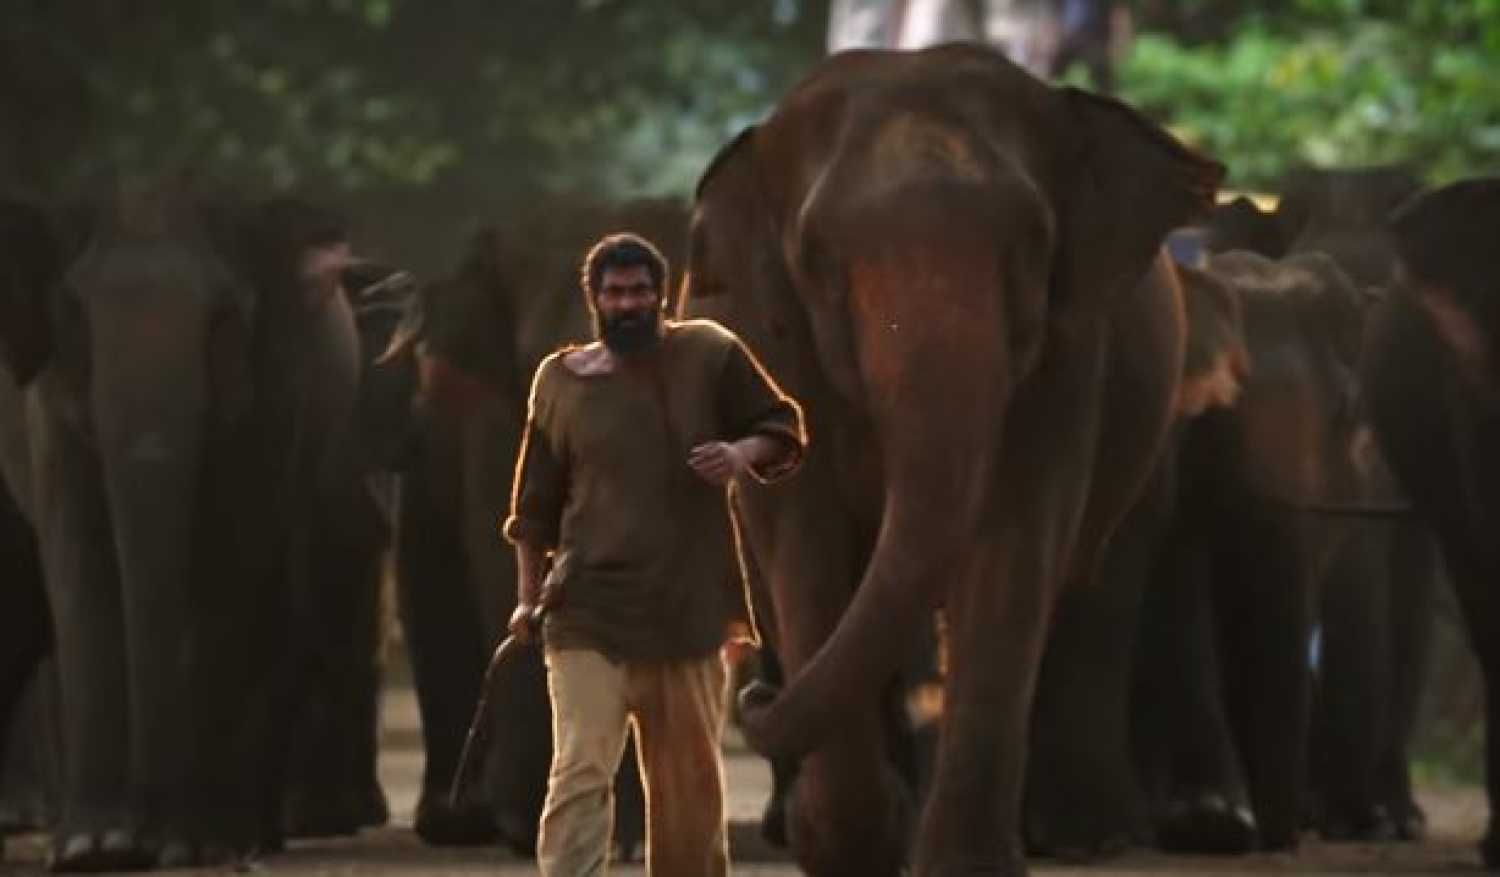 Rana Daggubati Starrer Haathi Mere Saathi Release Pushed Due To Covid-19, Telugu, Tamil Versions To Release As Planned